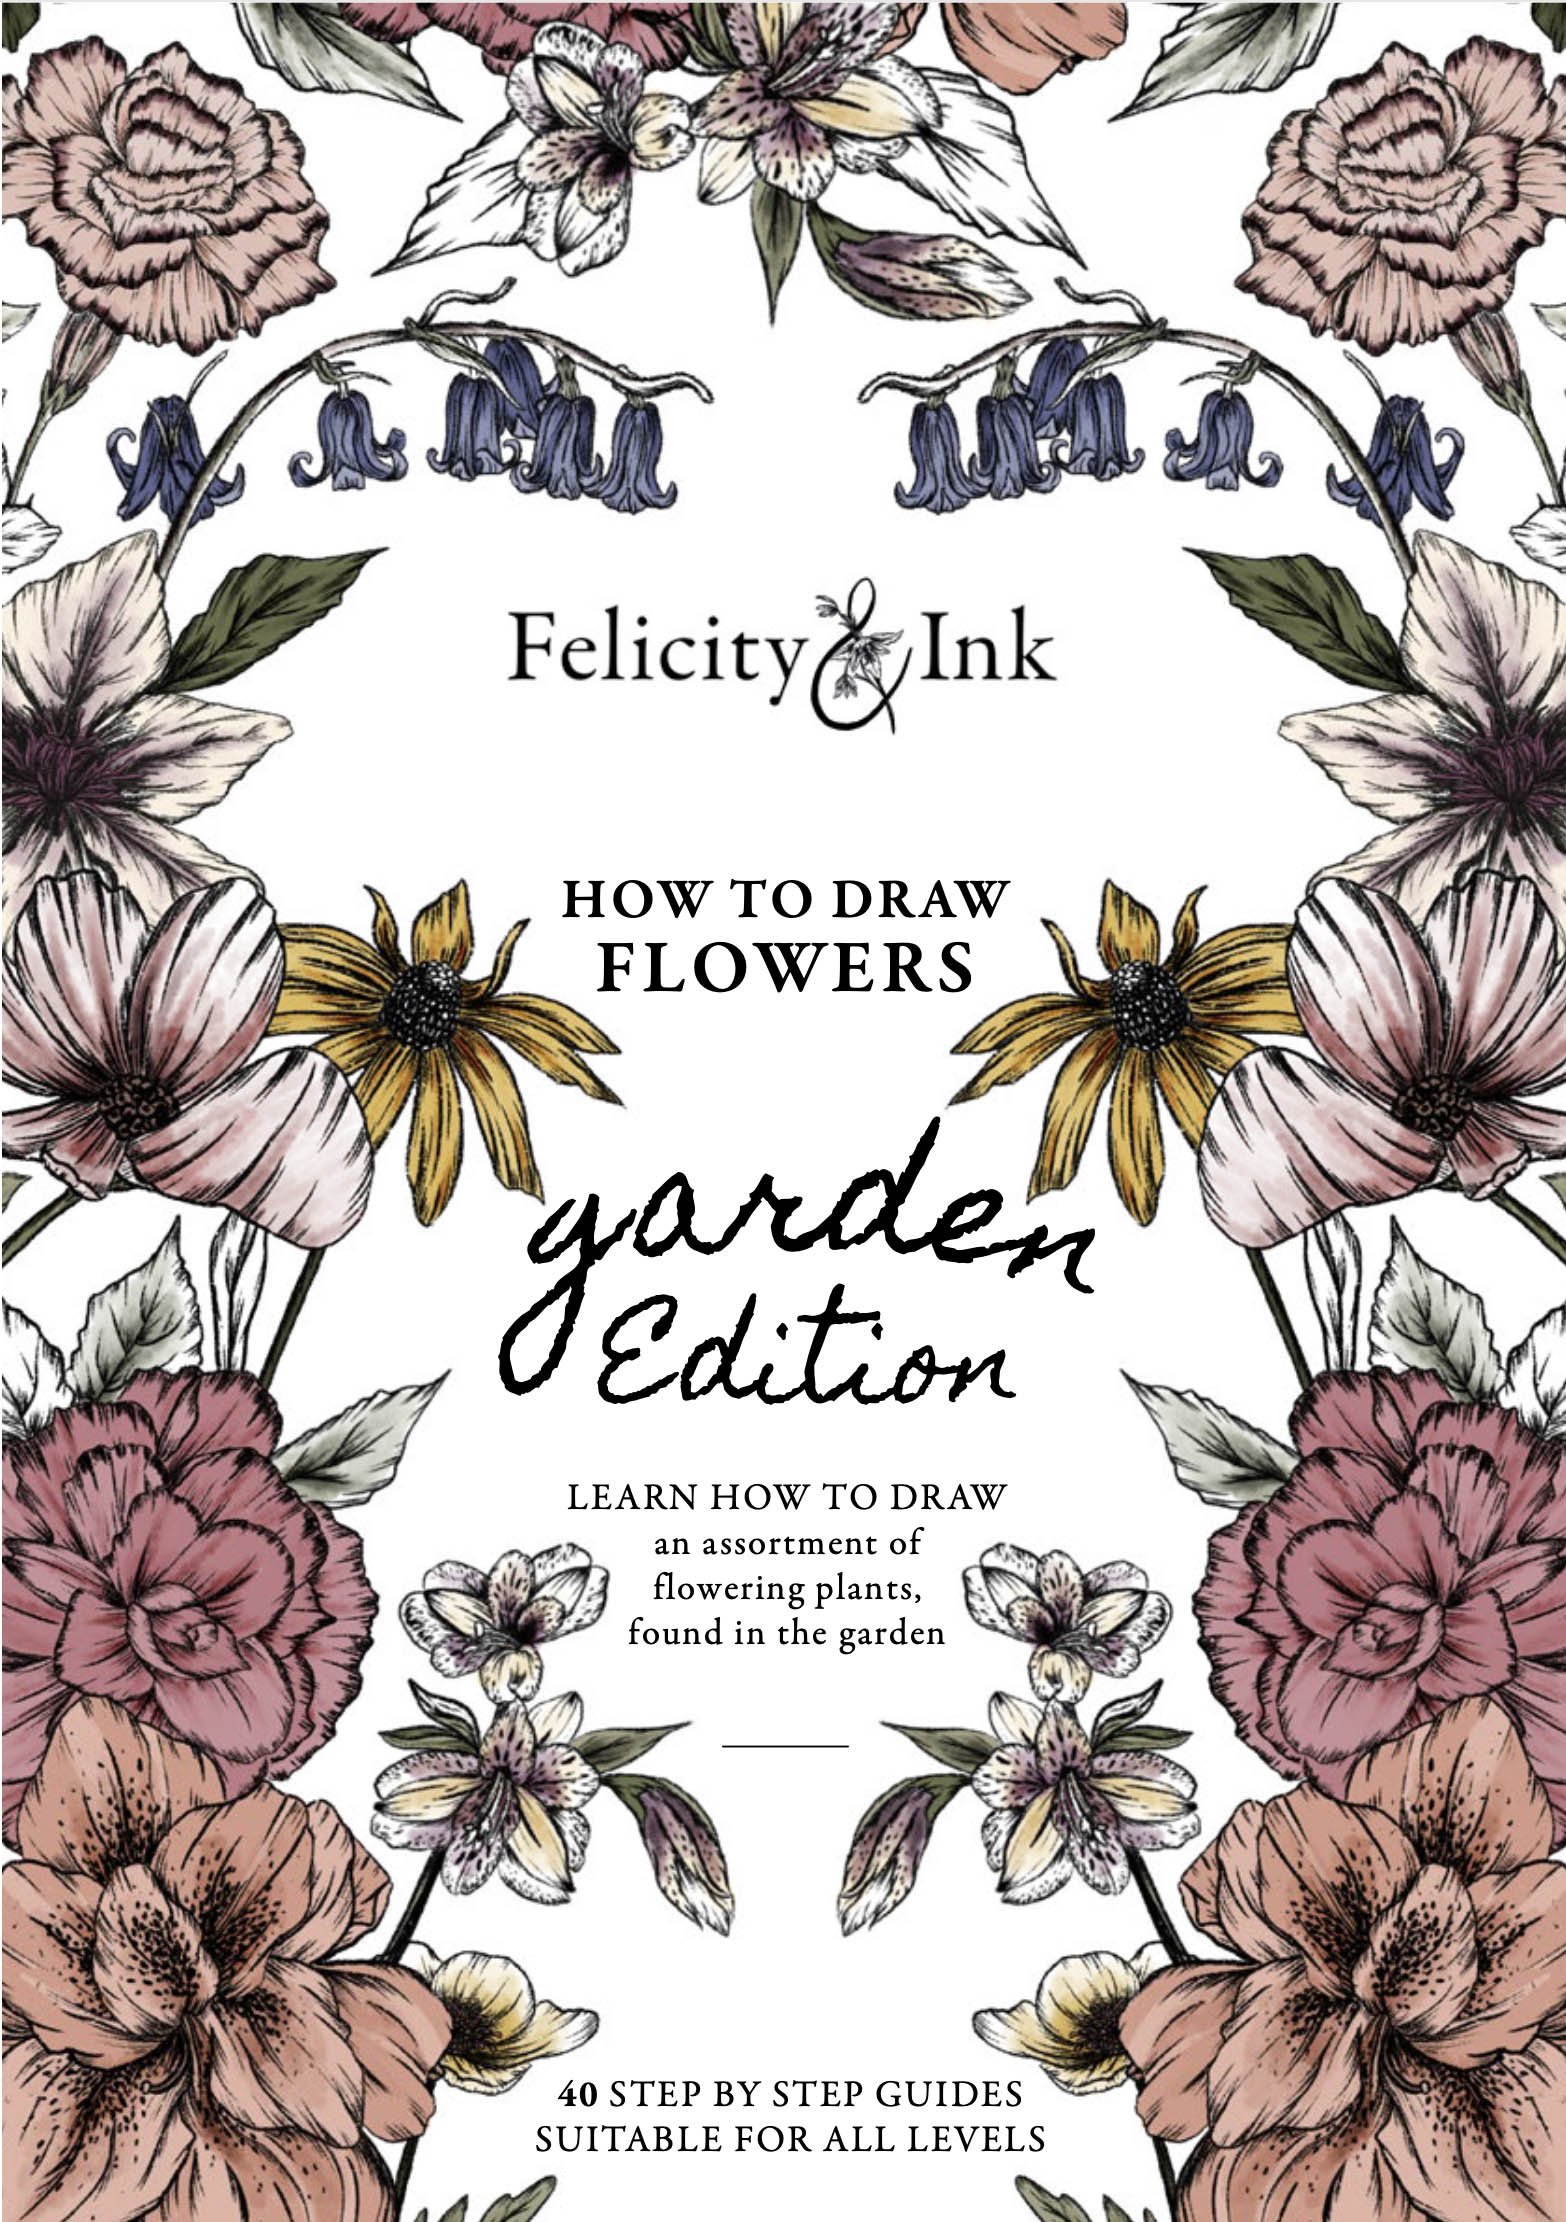 felicity-and-ink-how-to-draw-garden-flowers-step-by-step-ebook-s.jpg